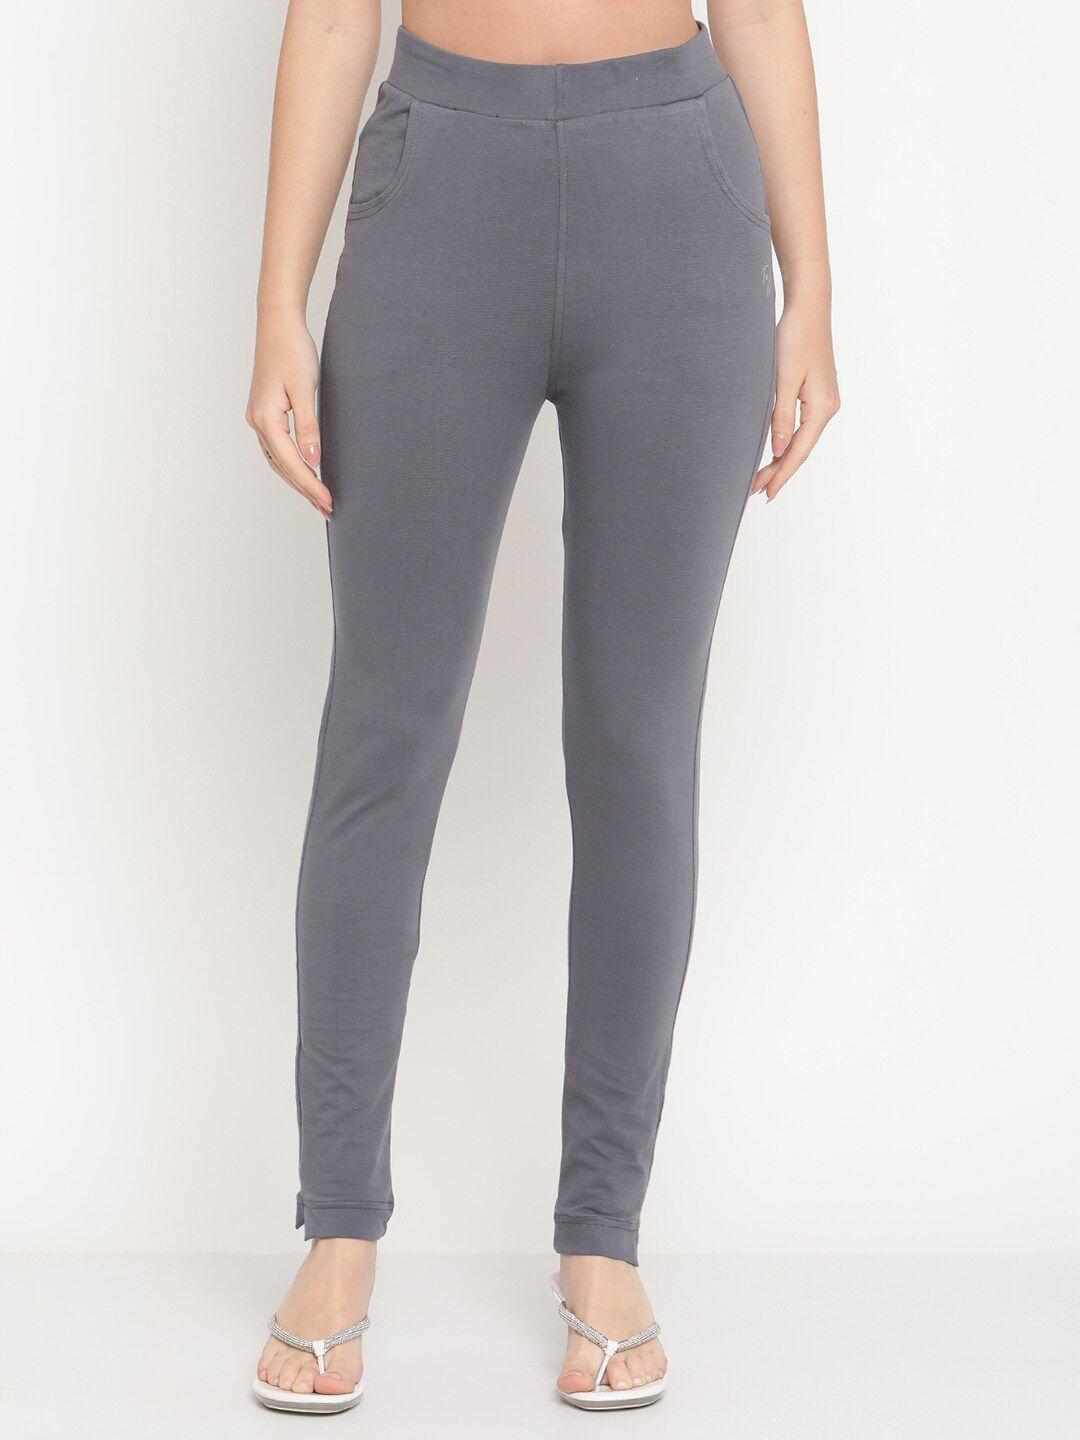 tag-7-women-grey-solid-jeggings